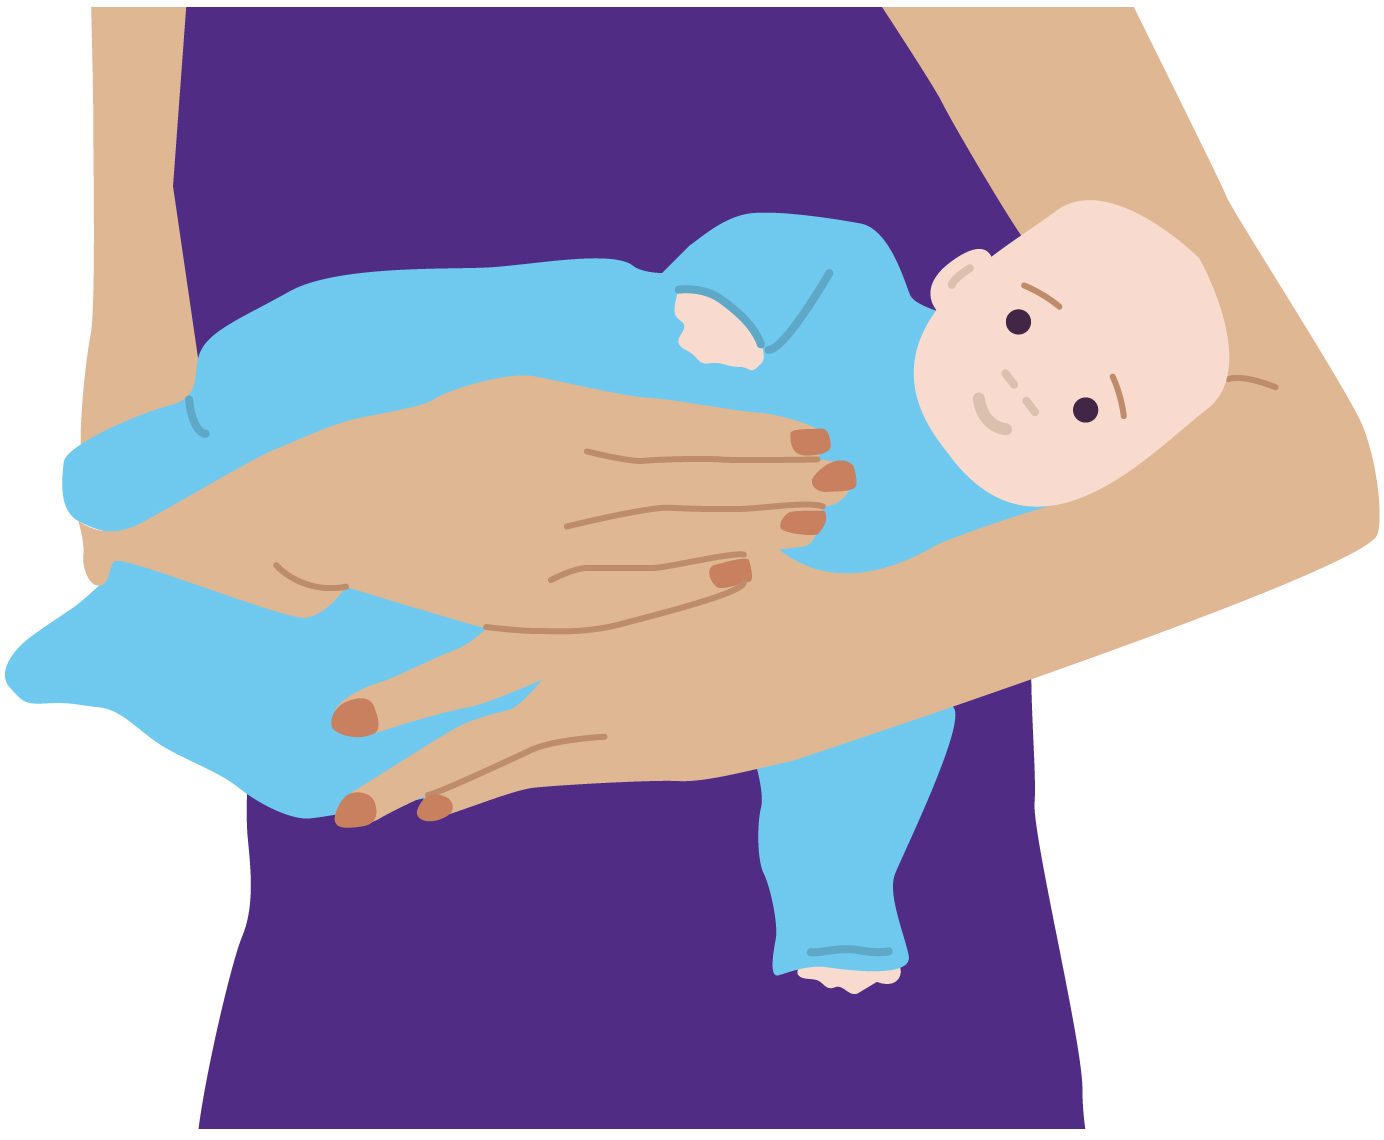 Illustration of baby being held on their side, through their legs